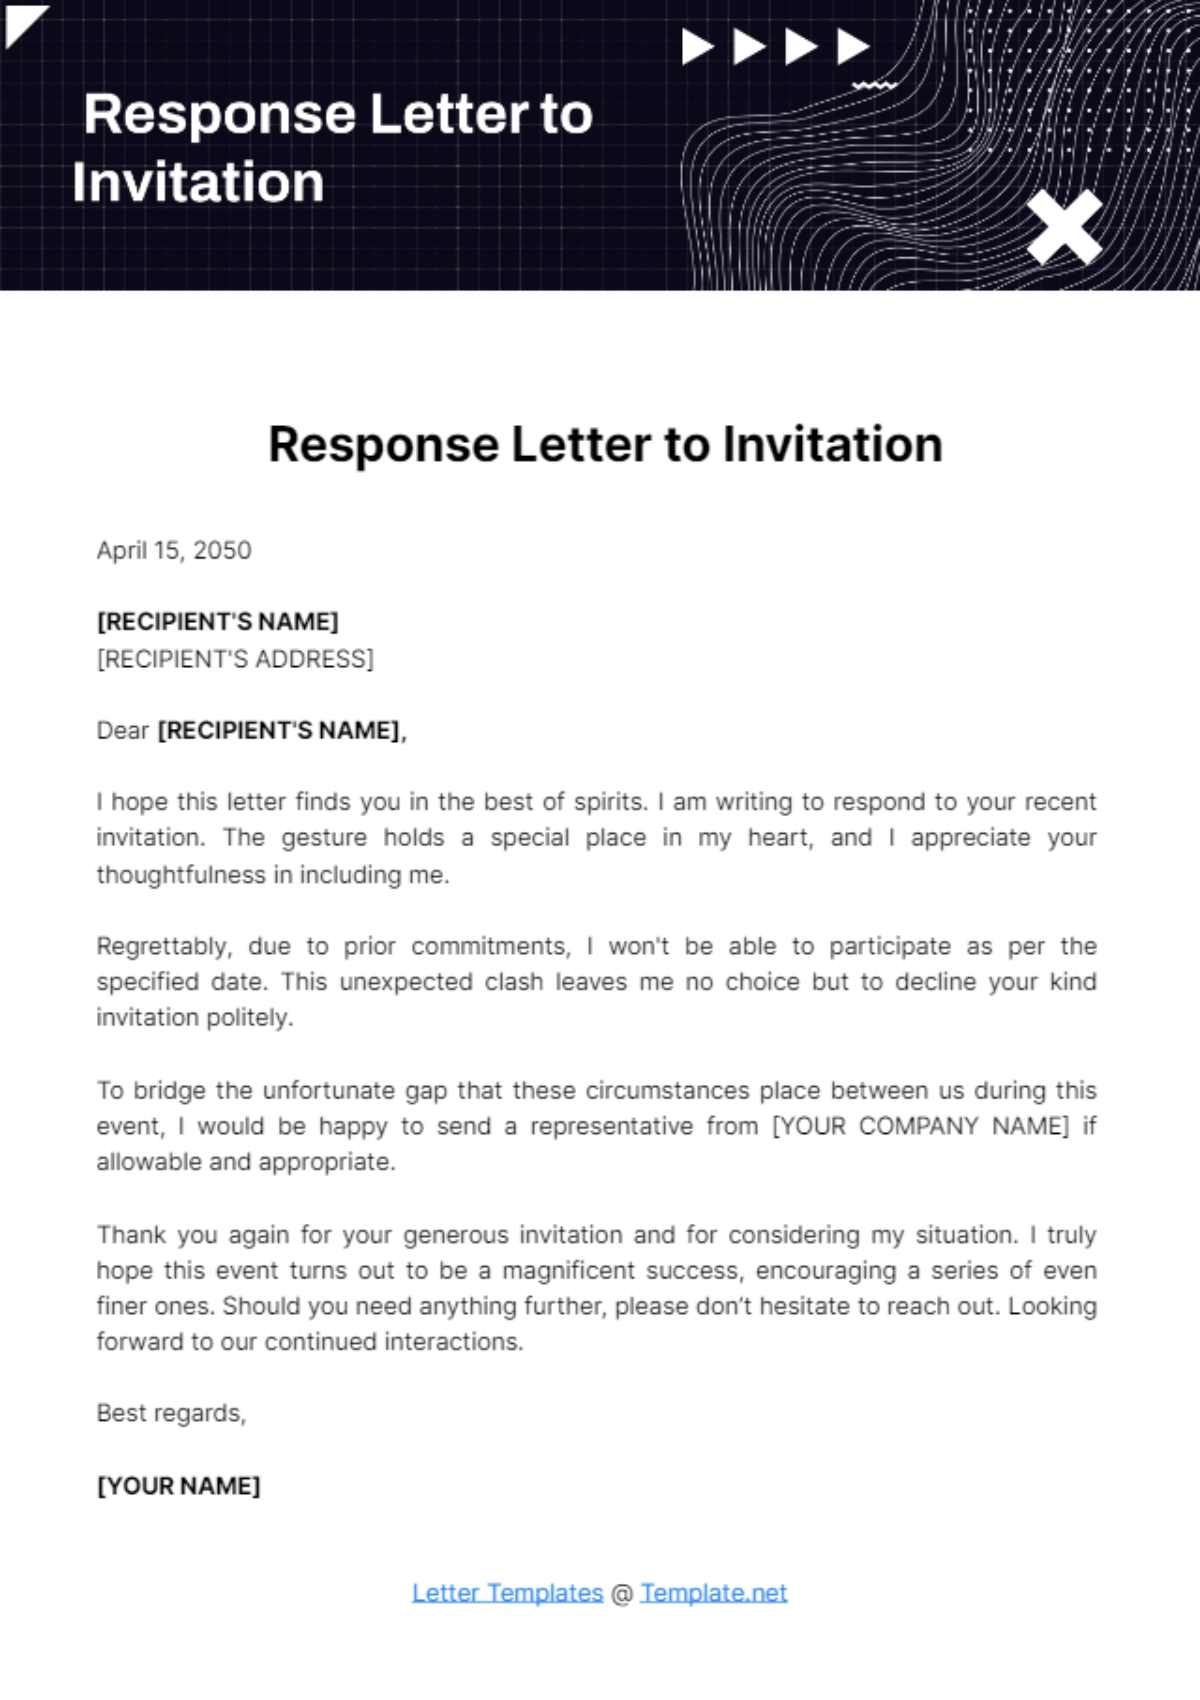 Response Letter to Invitation Template